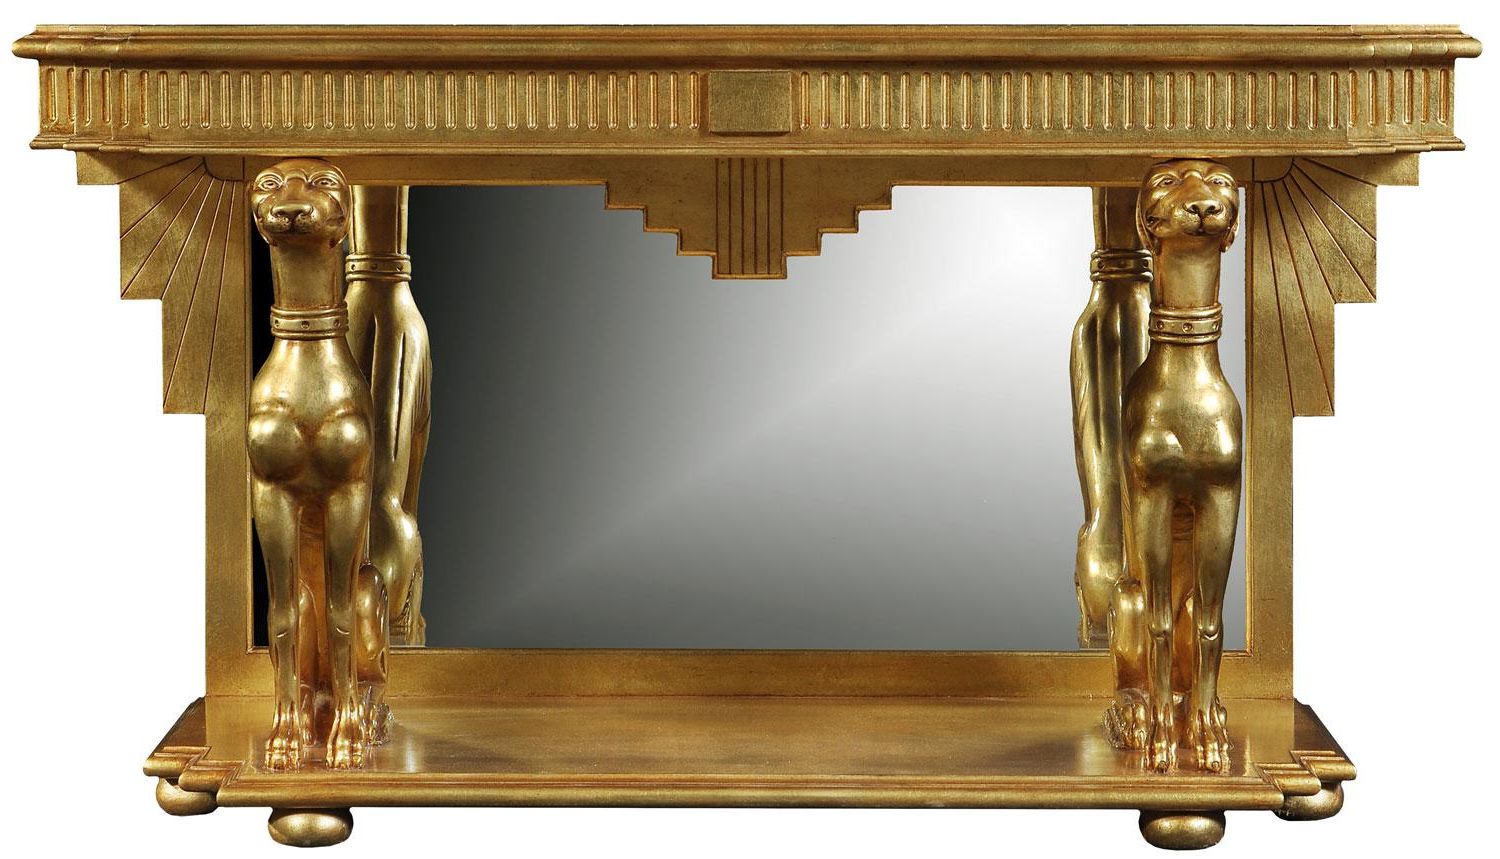 Antiqued Gold Rectangular Console Tables With Well Known Gold Leaf Console Table – Antique Finish, Console / Hall (View 8 of 10)